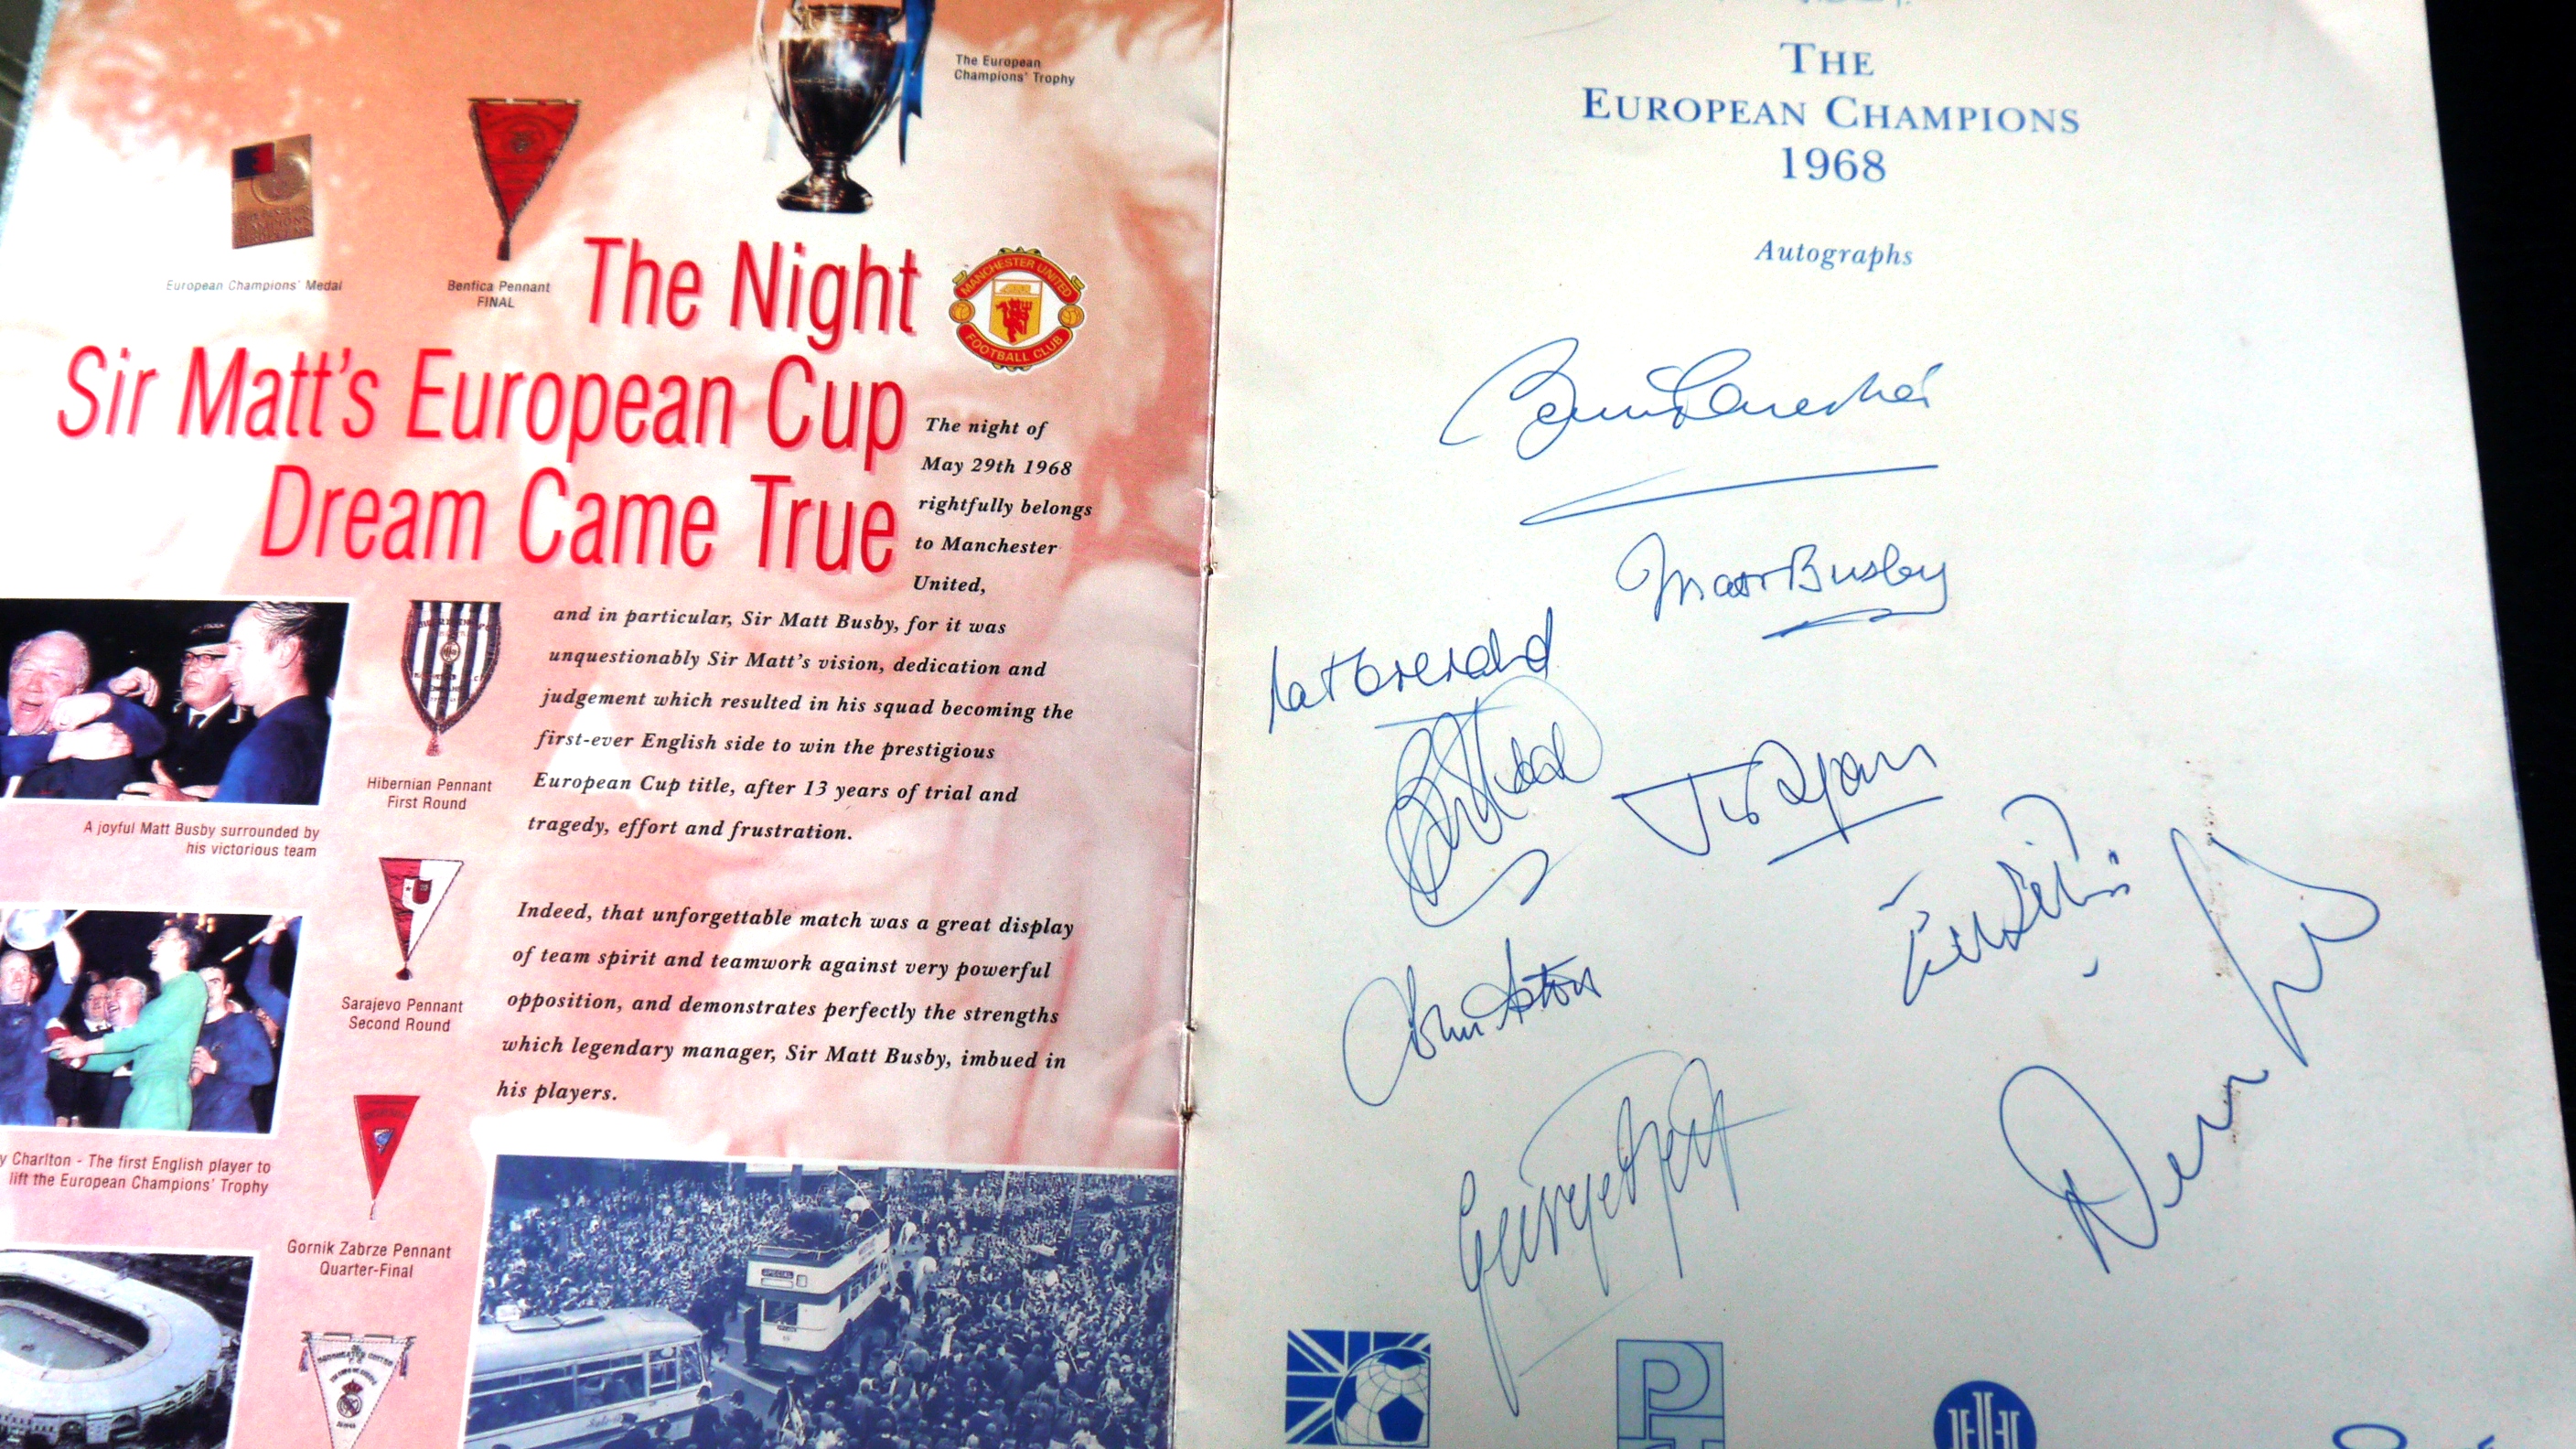 1993 MANCHESTER UNITED 25TH ANIV OF 1968 EUROPEAN CUP WIN AUTOGRAPHED MENU - Image 2 of 2